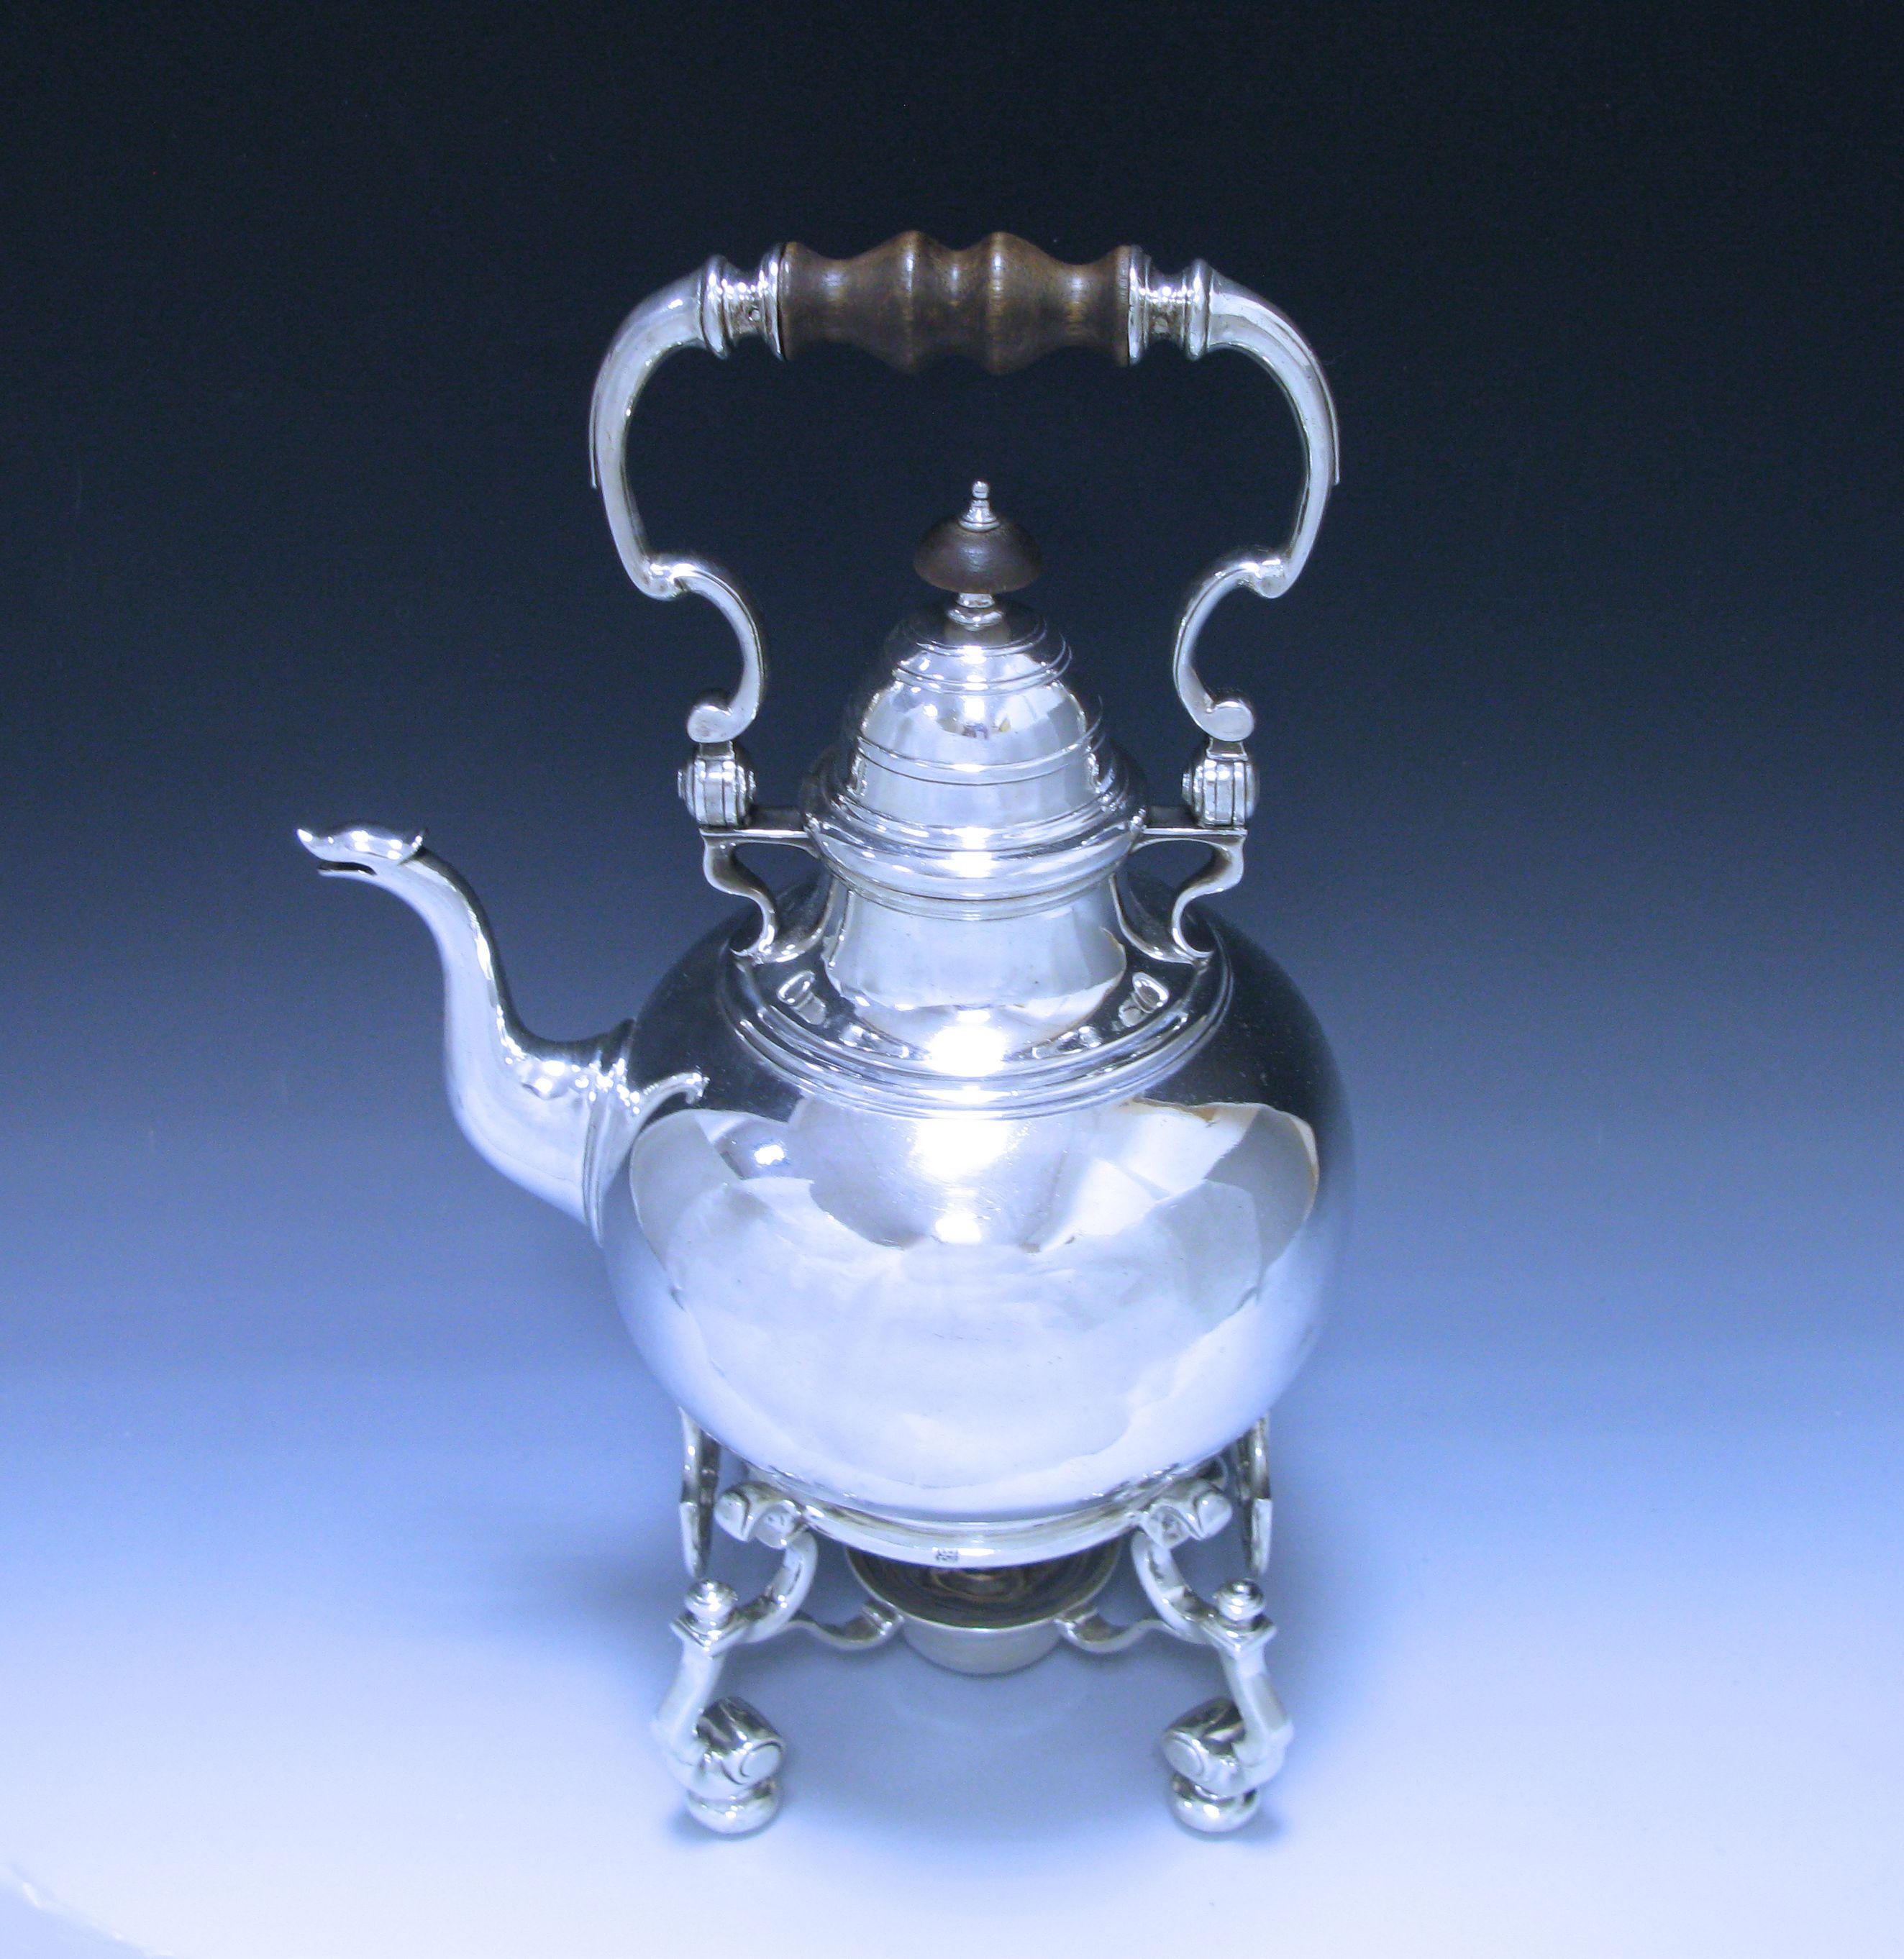 This antique Queen Anne sterling silver tea kettle on stand is of circular rounded form onto a collet foot. The kettle has the original hinged hallmarked lid which is domed and has a wooden finial. The kettle is fitted with an impressive sterling